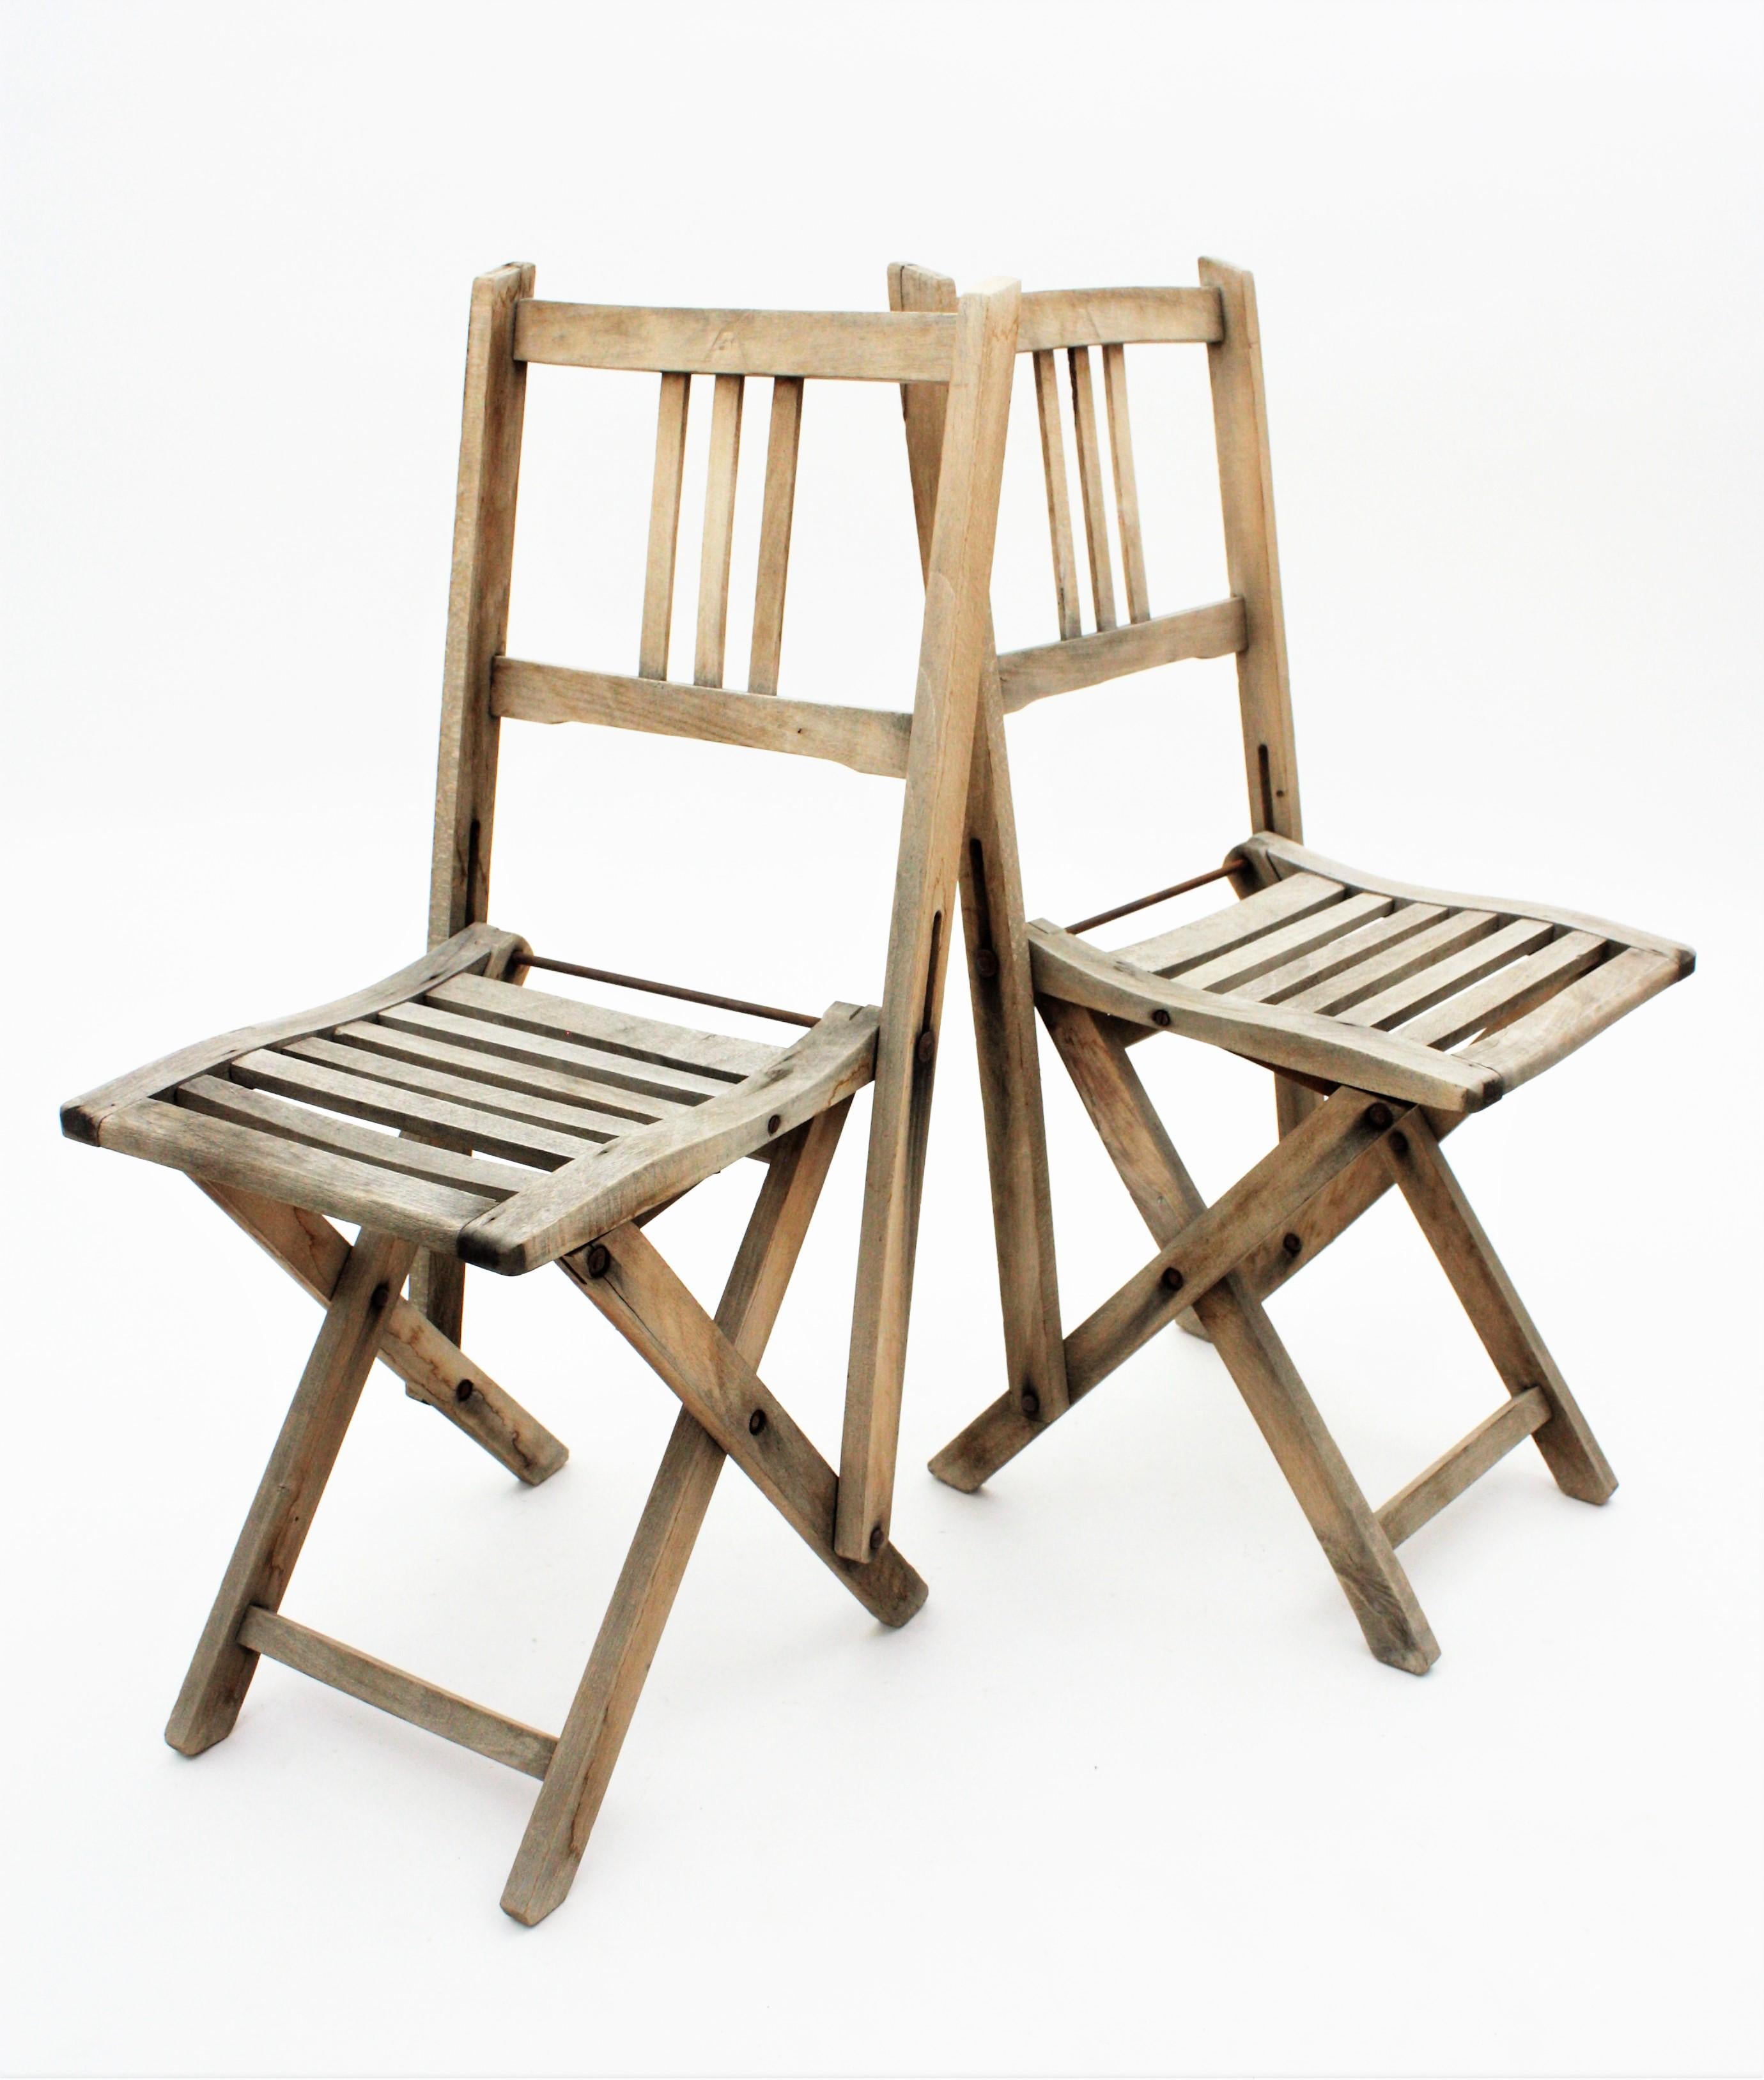 Hand-Crafted Pair of Foldable Terrace Chairs in Natural Wood, Child-Size  For Sale